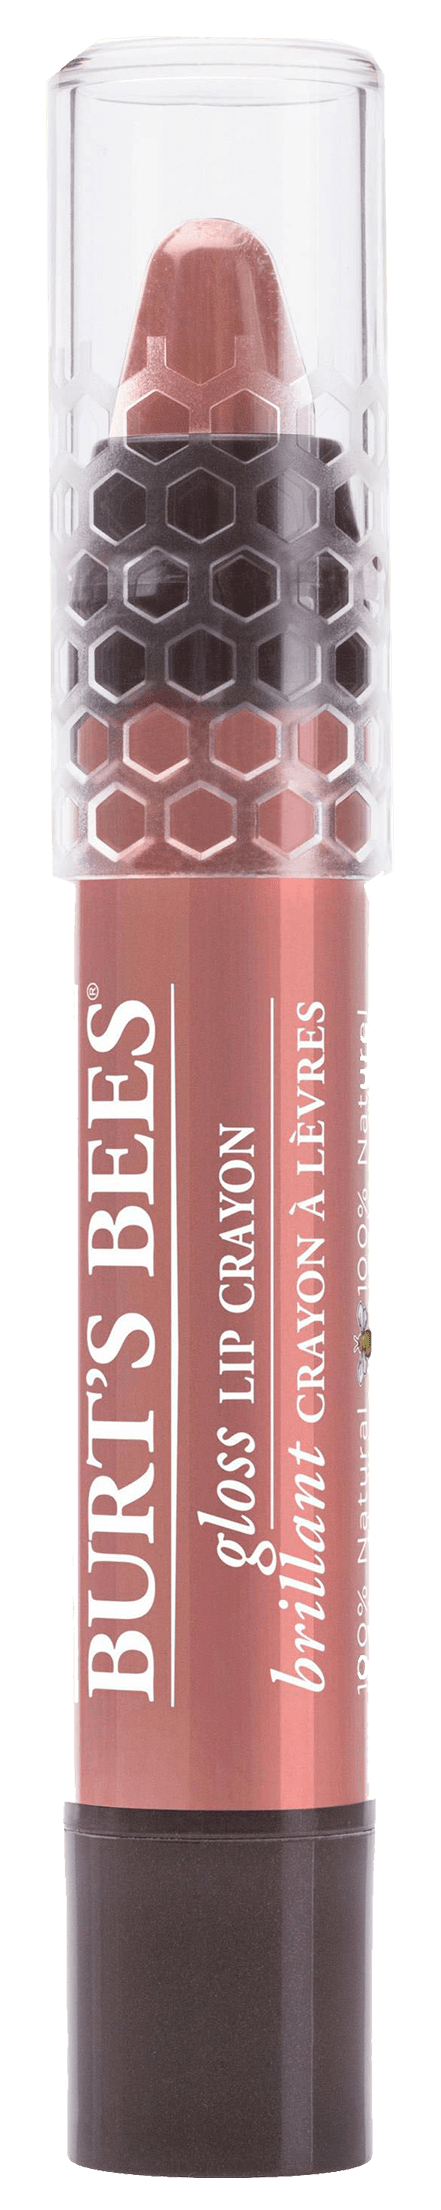 Burt's Bees Glossy Crayon Outback Oasis ohne Hintergrund